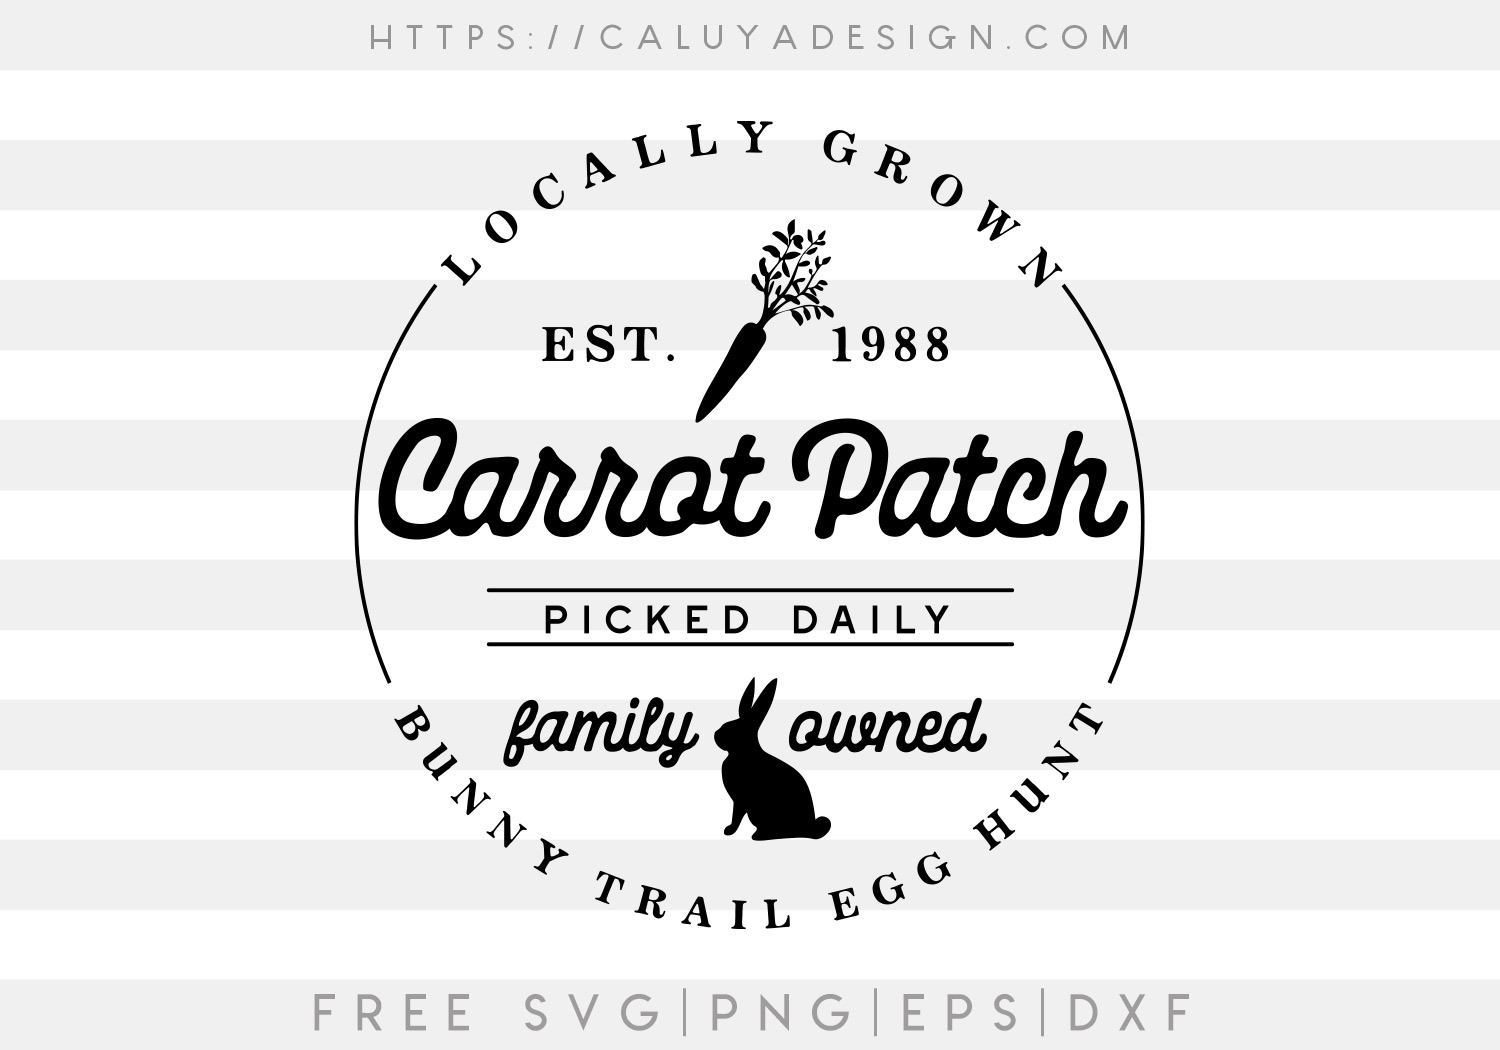 free-carrot-patch-svg-png-eps-dxf-by-caluya-design